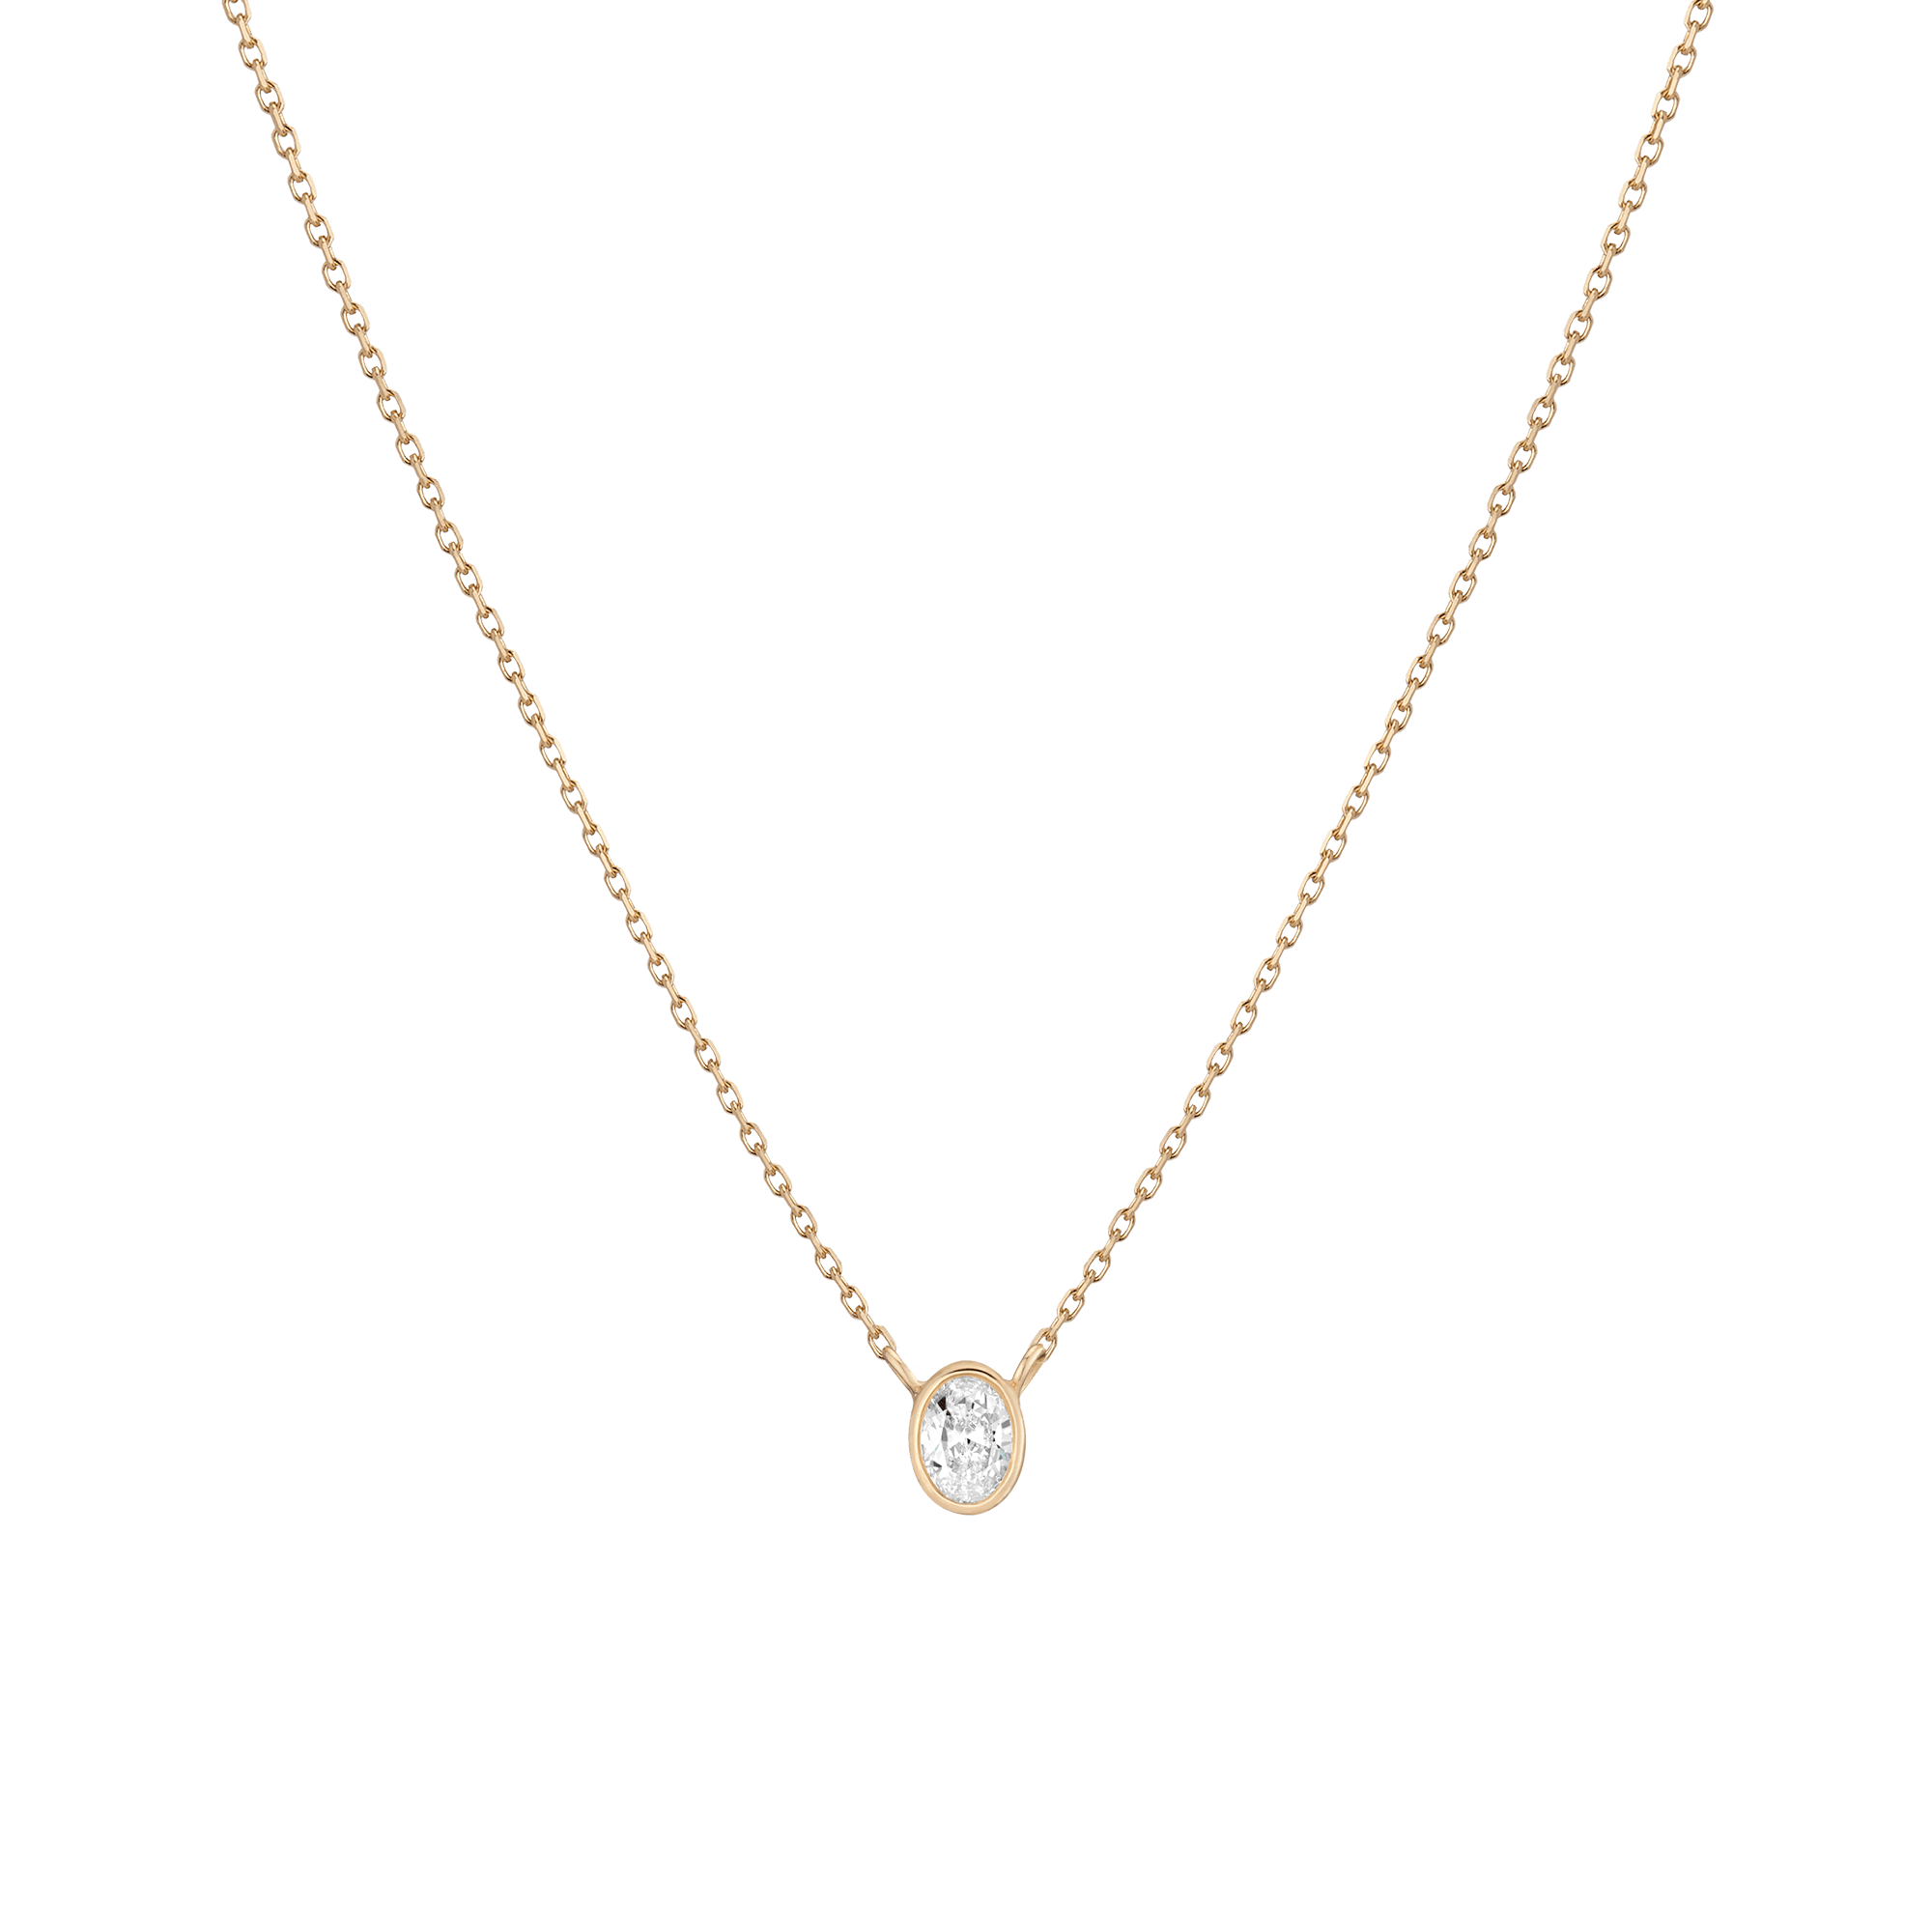 Diamond Oval Bezel Necklace in Yellow, Rose or White Gold